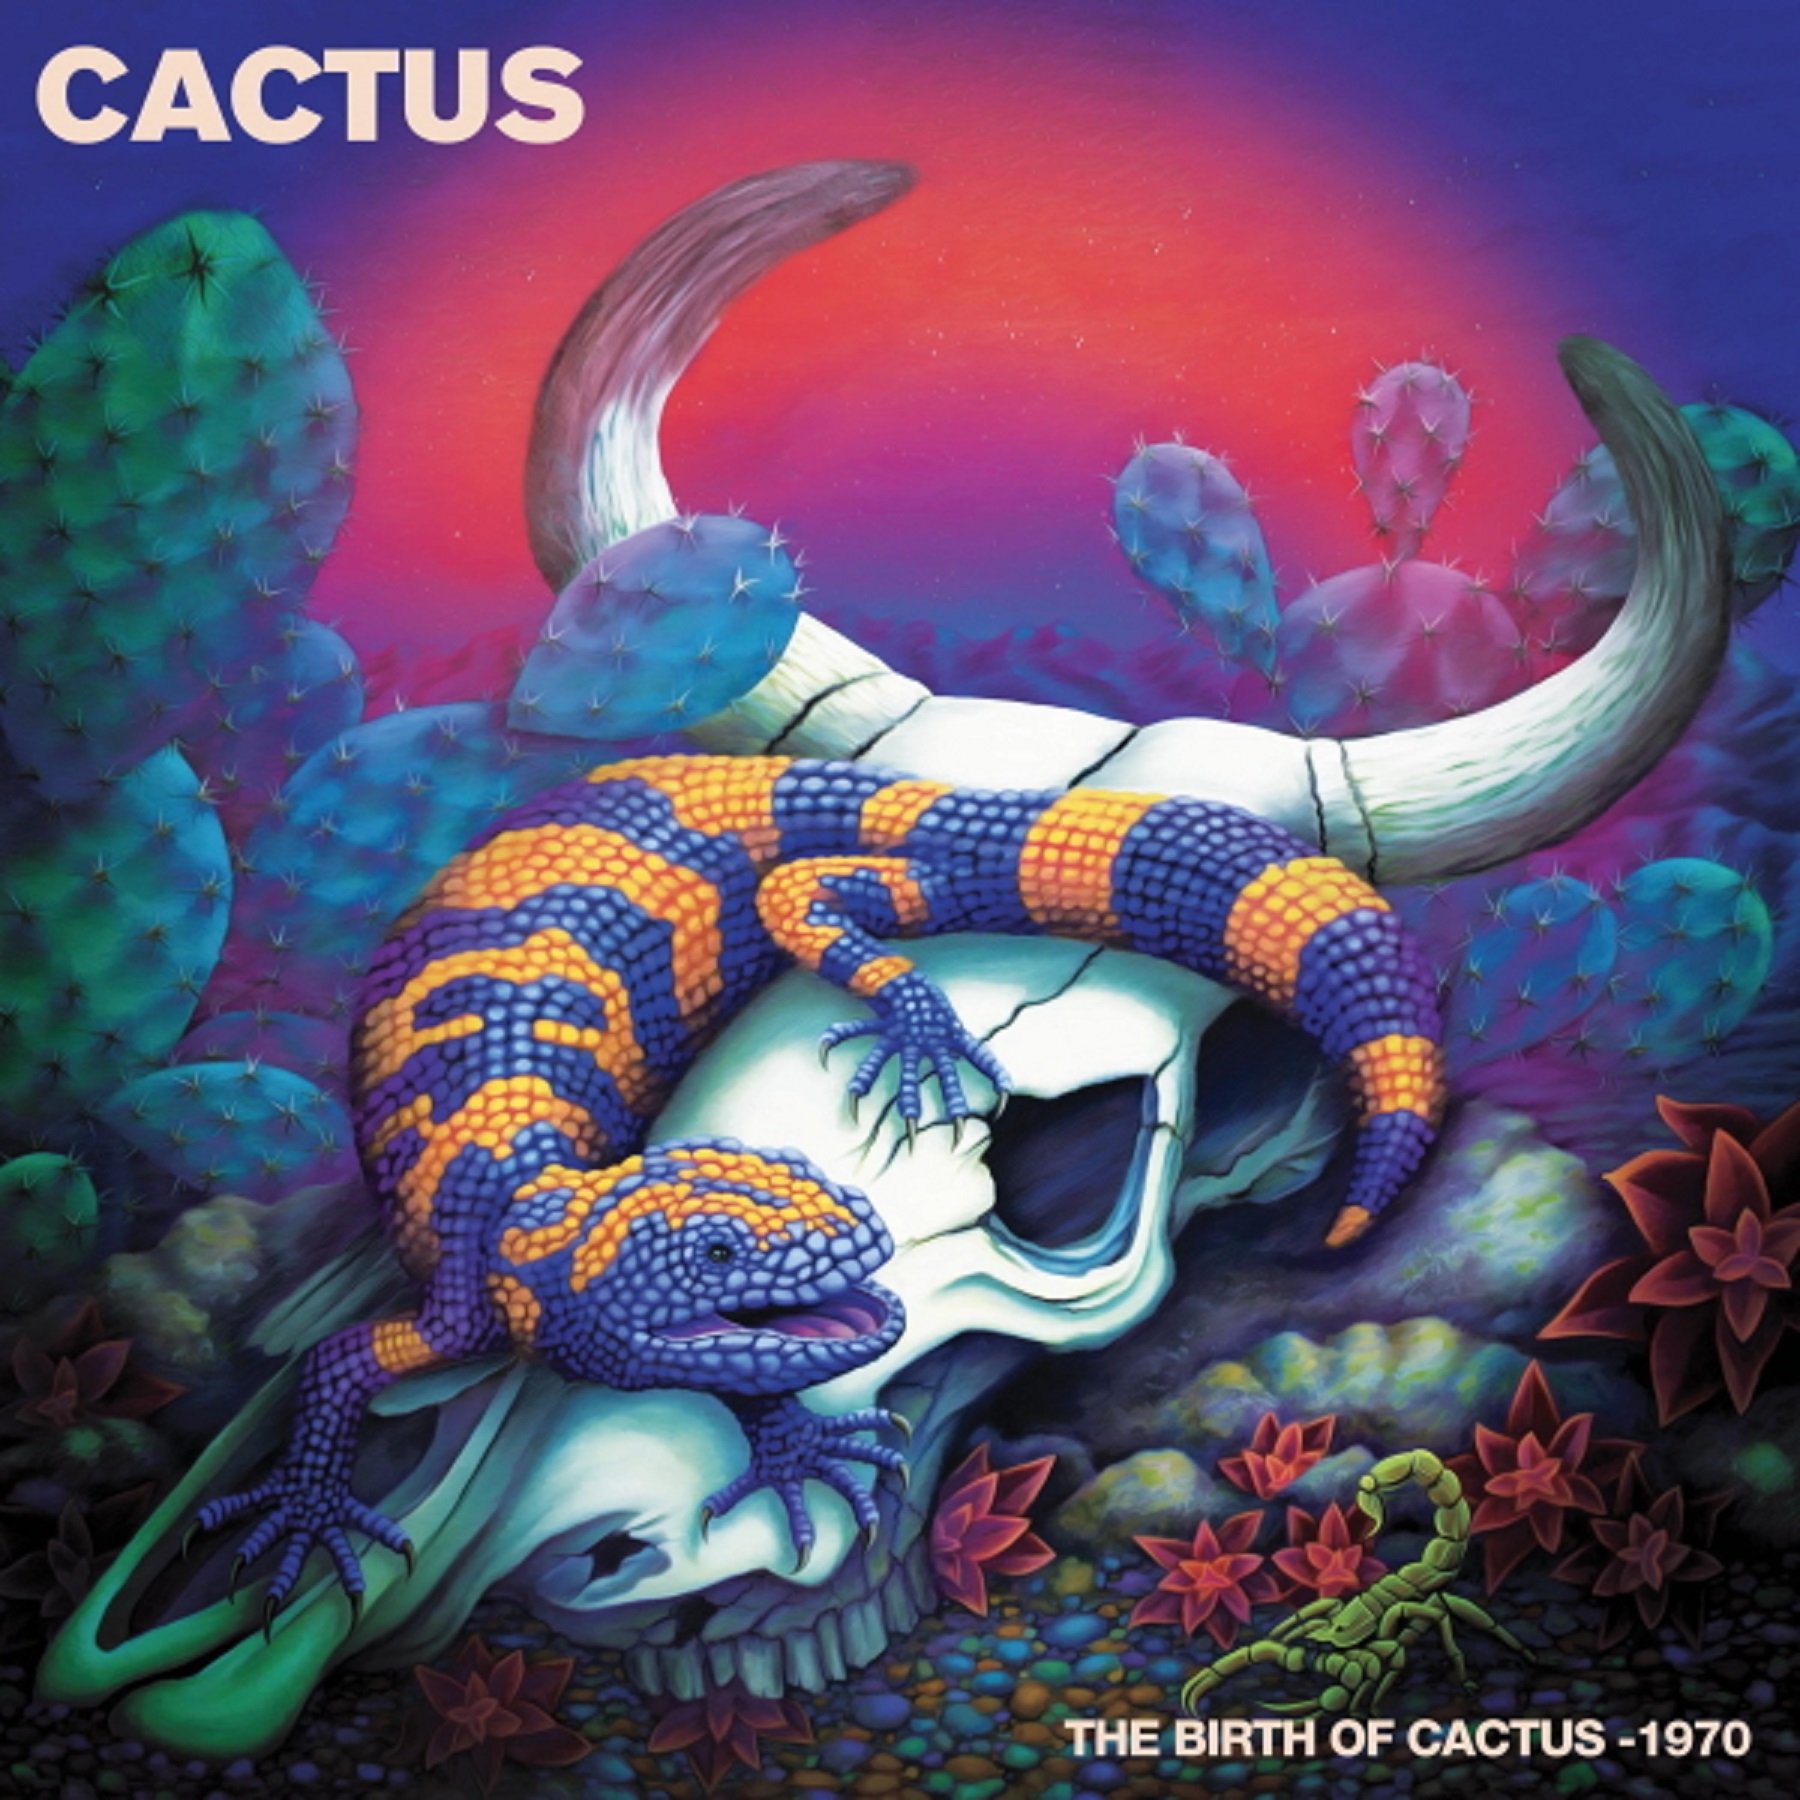 Live Concert From Classic Rock Legends CACTUS Finally Sees An Official Release